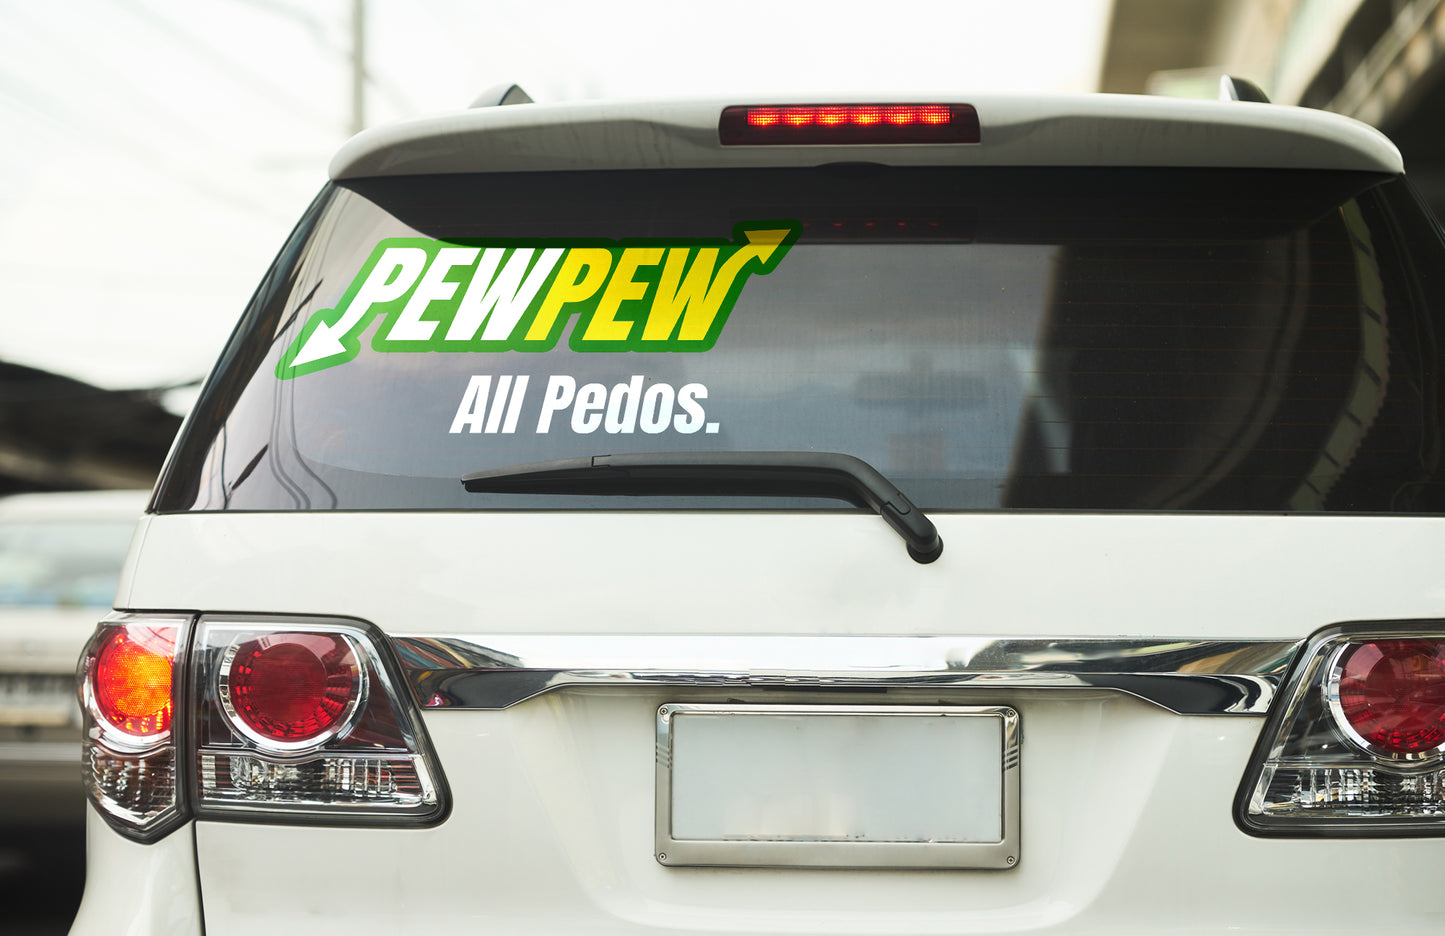 PewPew ALL Pedos Vinyl decal decal stickers Decals for cars Decals for Trucks decals for tumblers minivan sticker SUV decals truck decals window decal car Window decals window decor